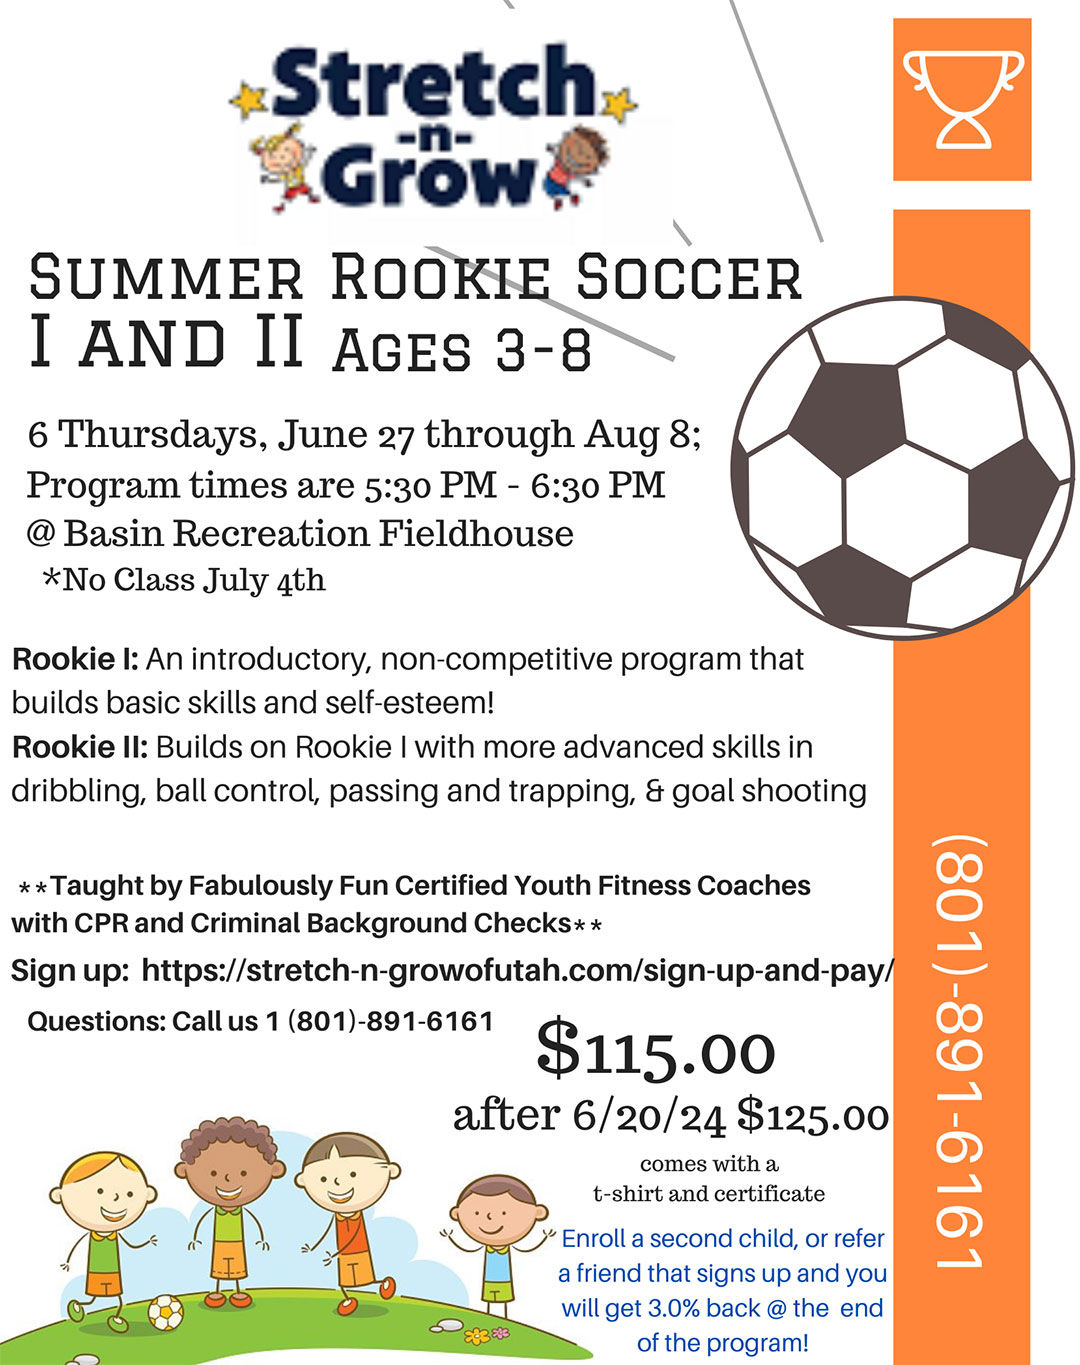 summer rookie soccer 1 and 2 flyer